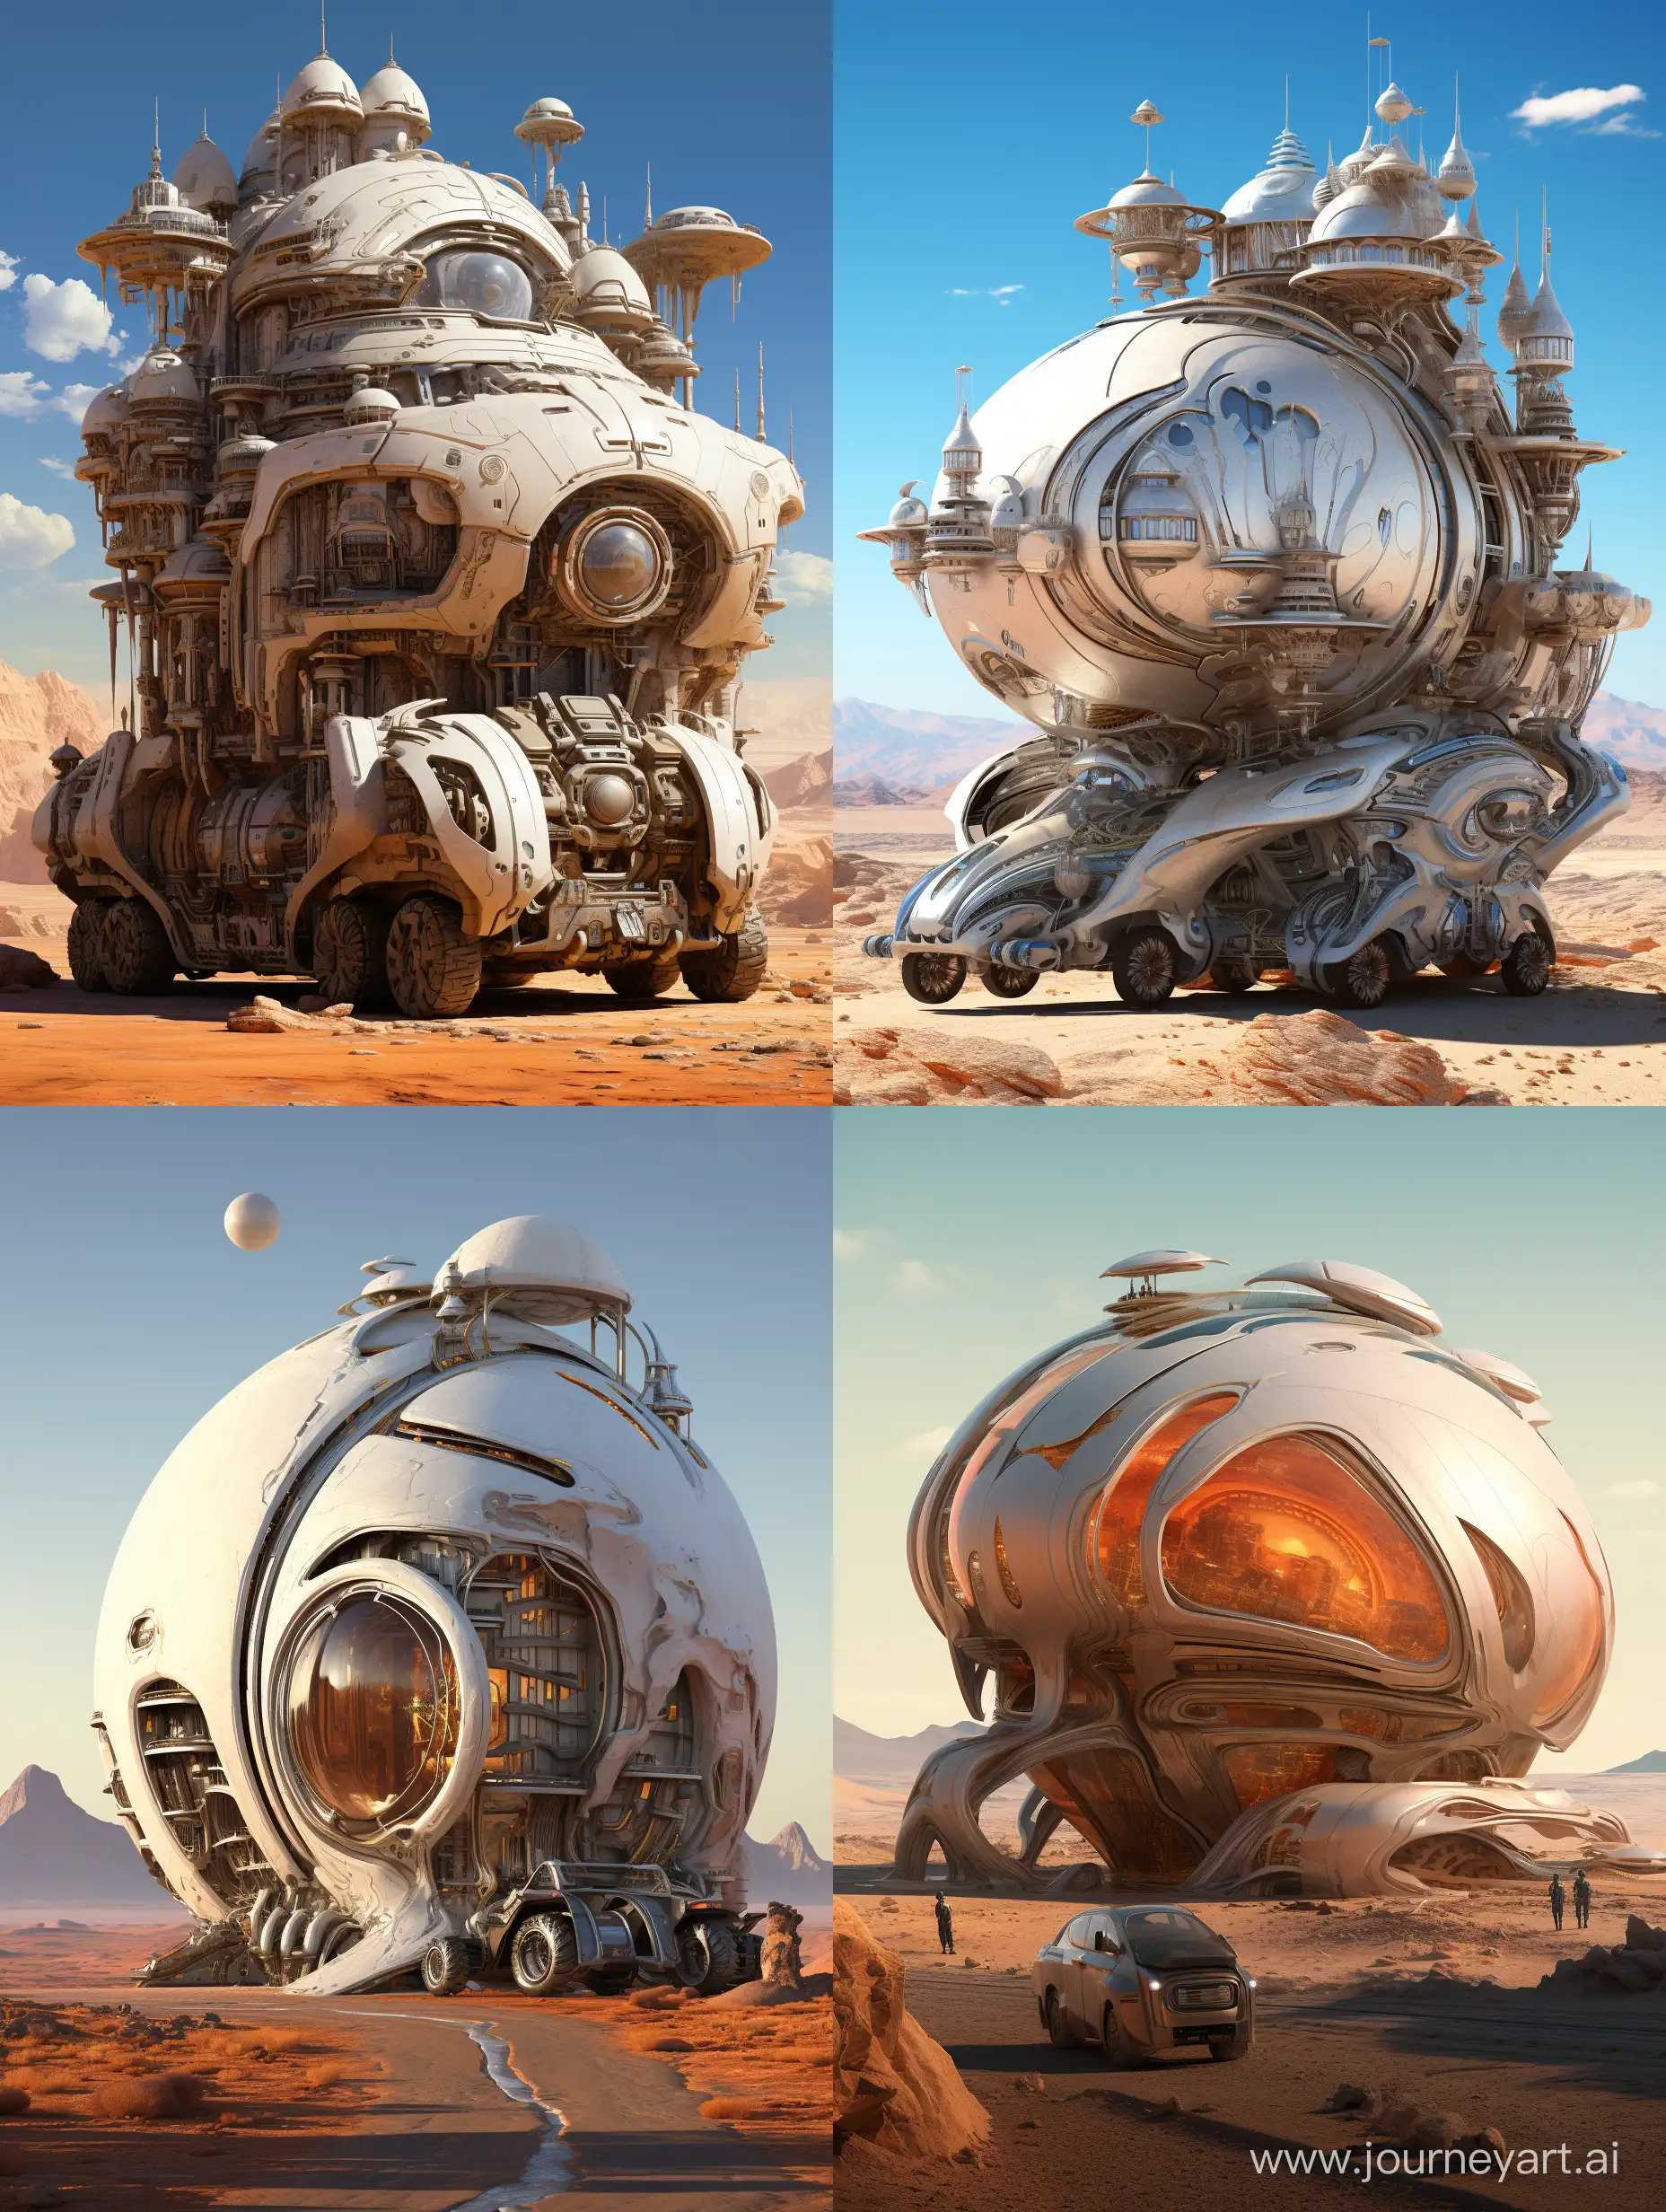 The image features a futuristic vehicle with multiple wheels and an intricate design, resembling a spaceship or a robotic creature. The vehicle is parked on the road in front of a building, showcasing its impressive structure. The scene appears to be set in a desert-like environment, adding to the sense of adventure and exploration associated with this unique vehicle.